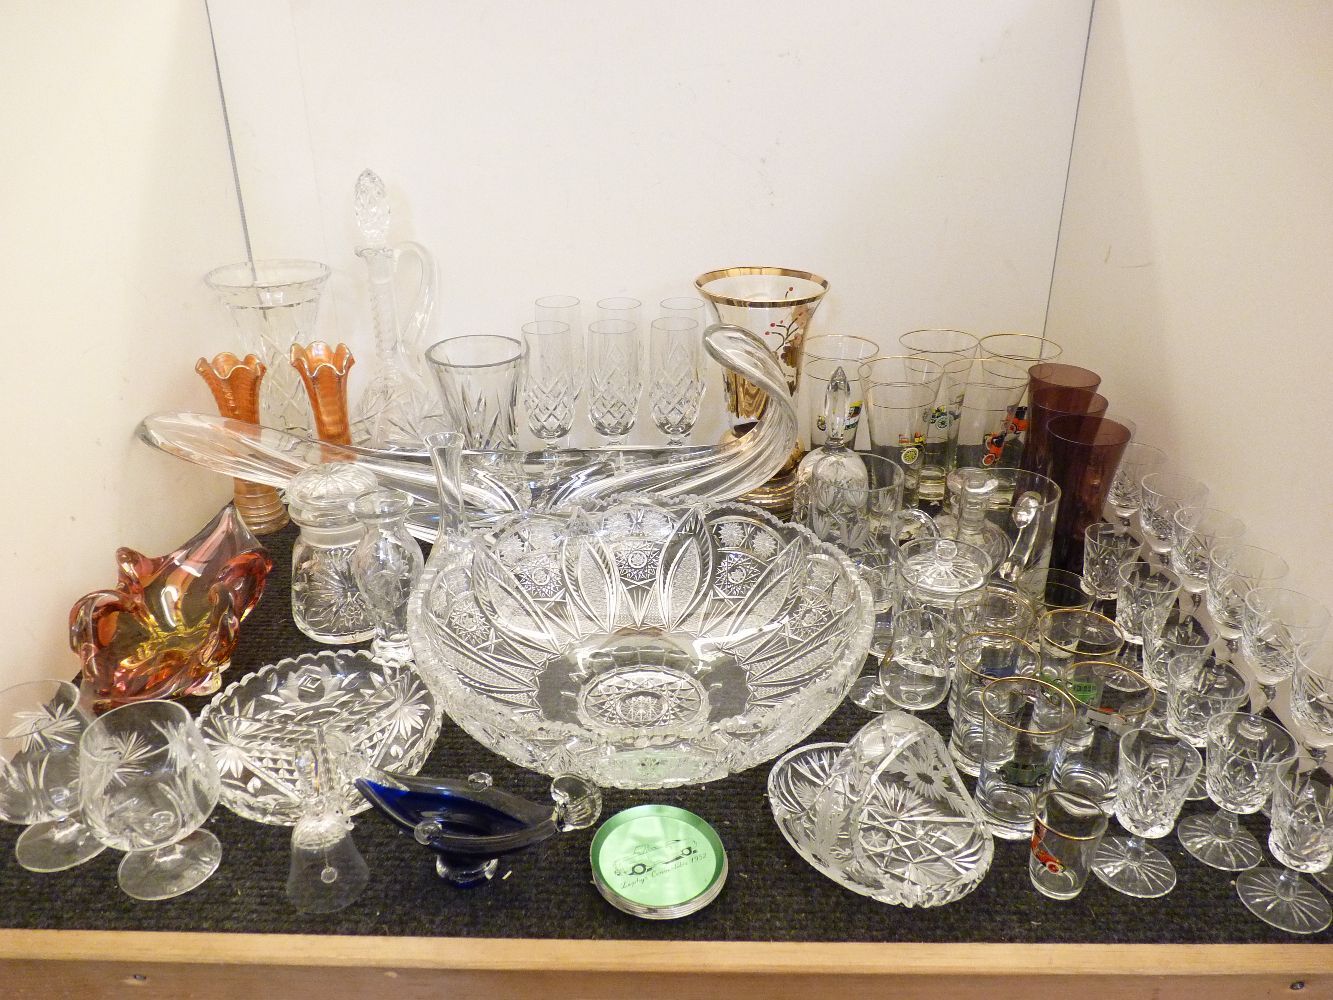 Assorted glassware, including a large cut glass bowl, glasses with classic car designs, etc